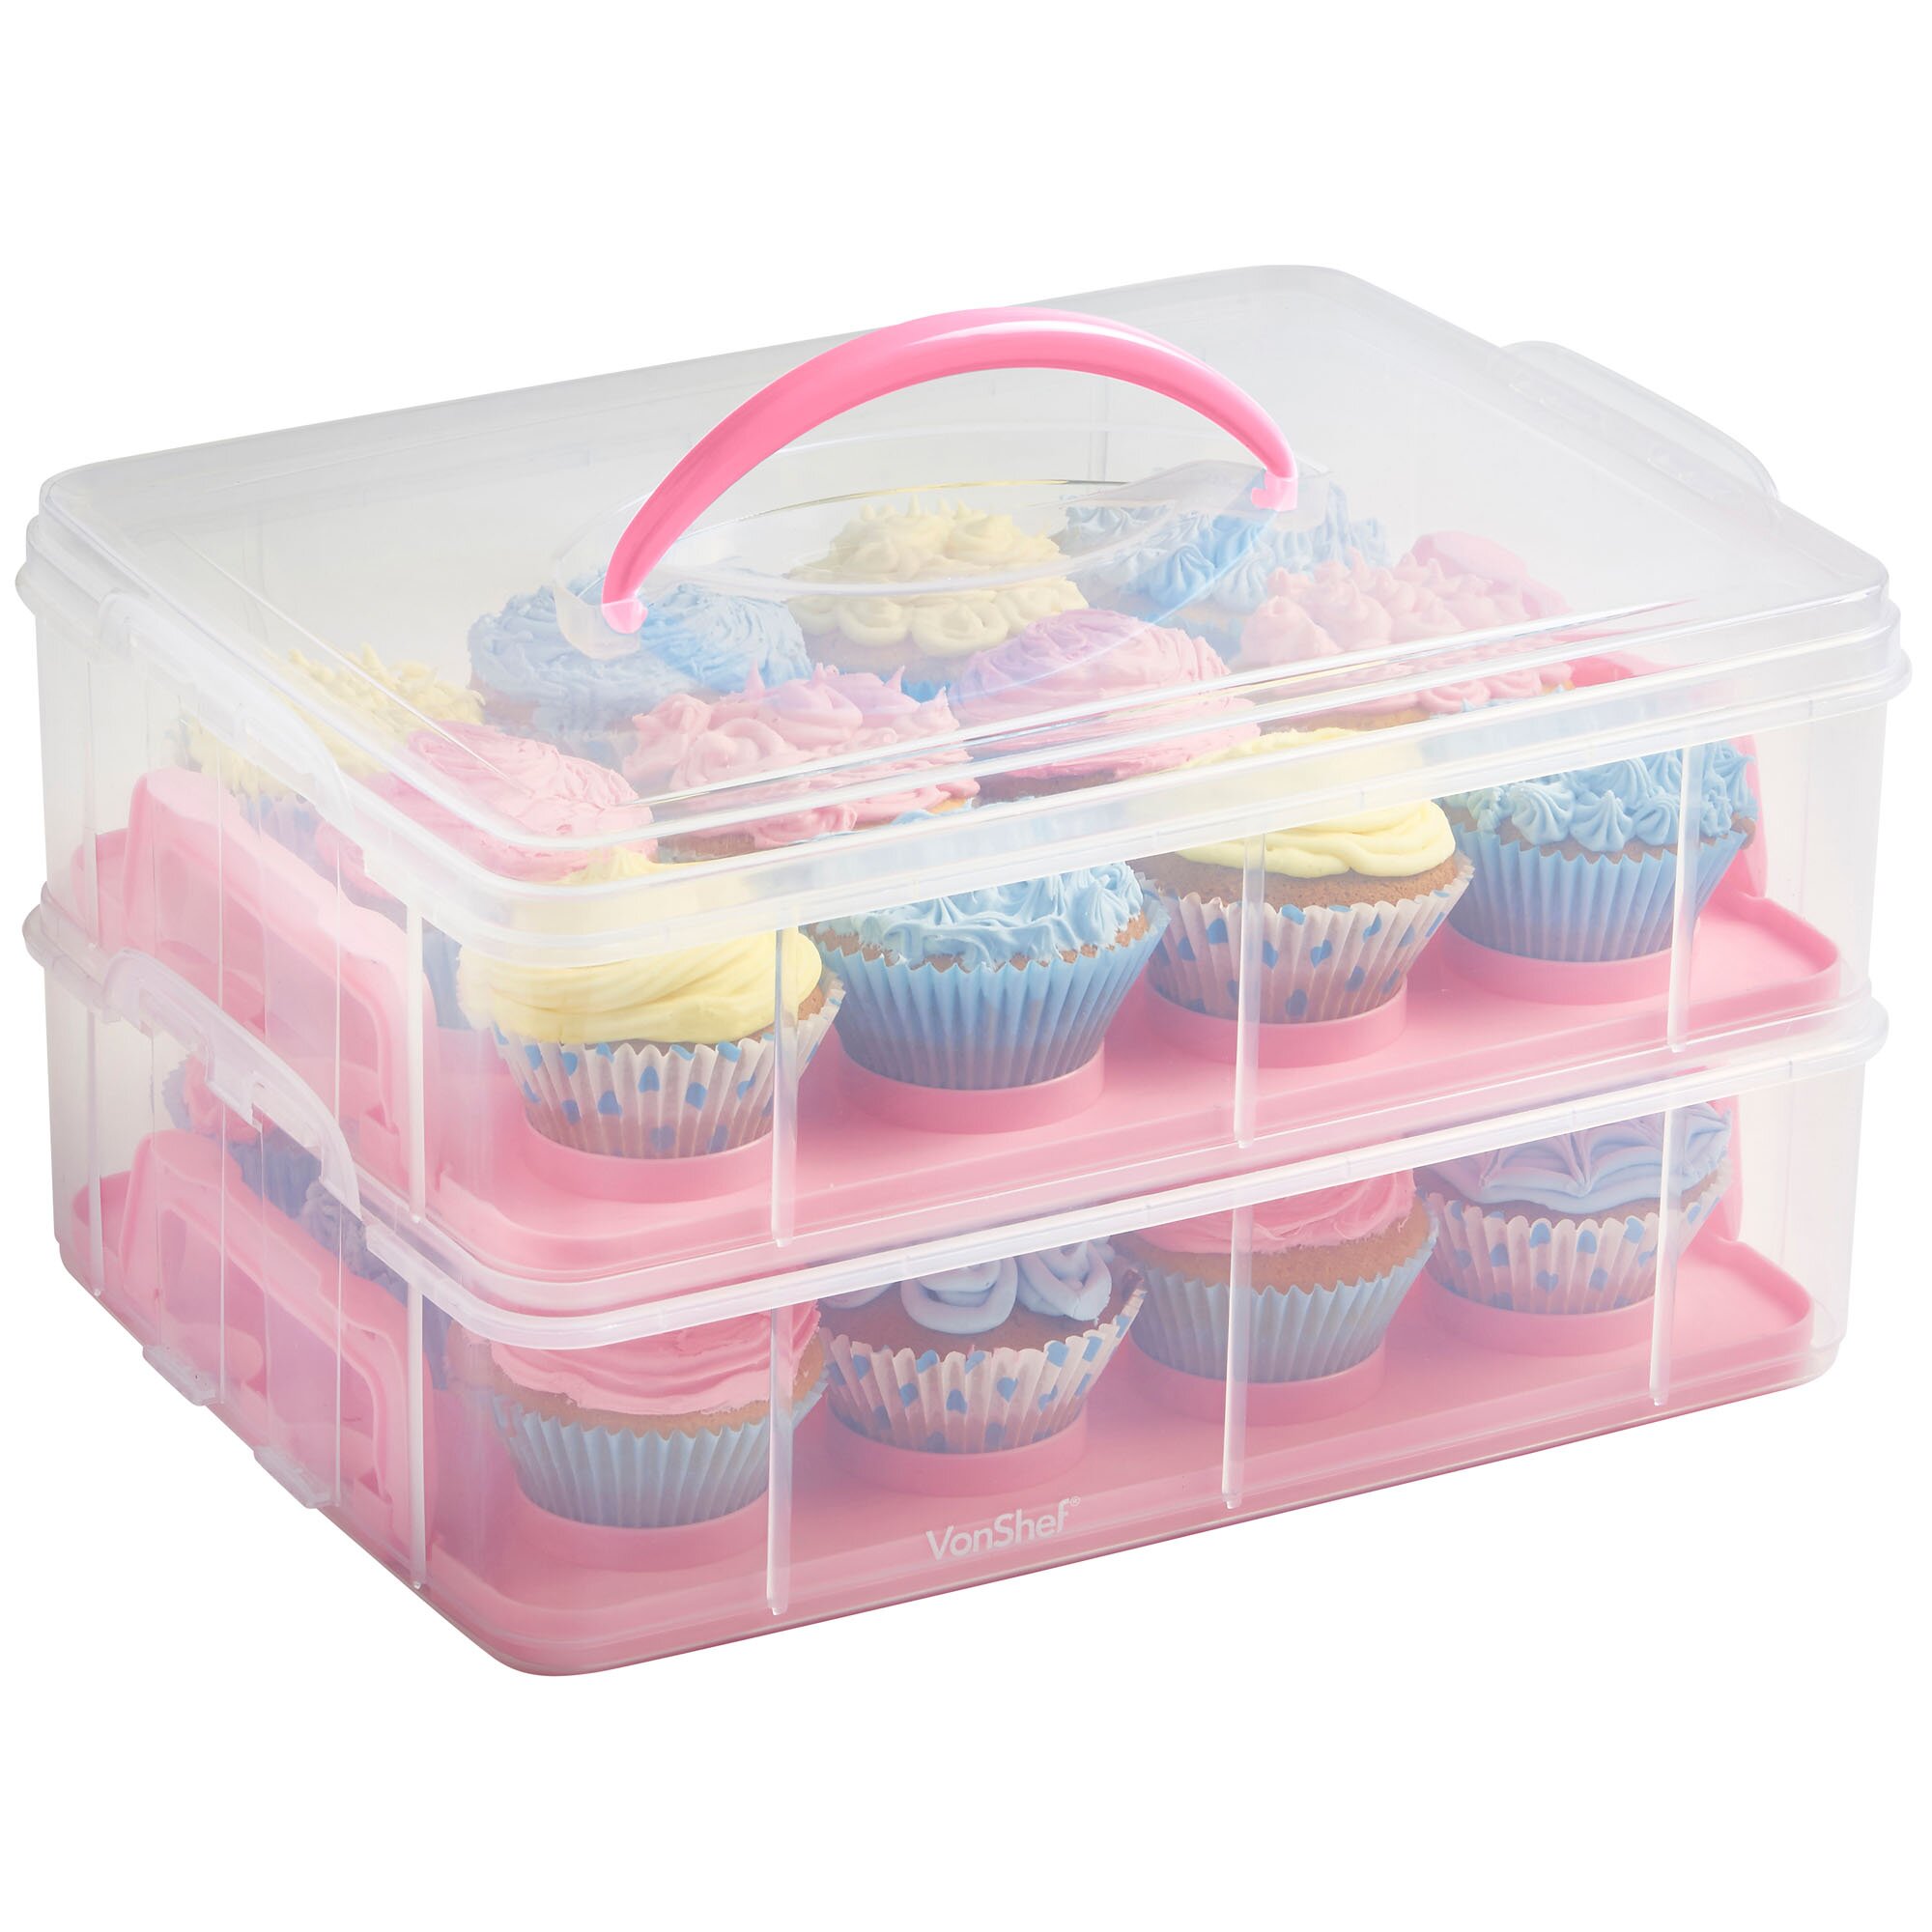 VonShef 3 Tier Cupcake Holder and Carrier Container & Reviews | Wayfair